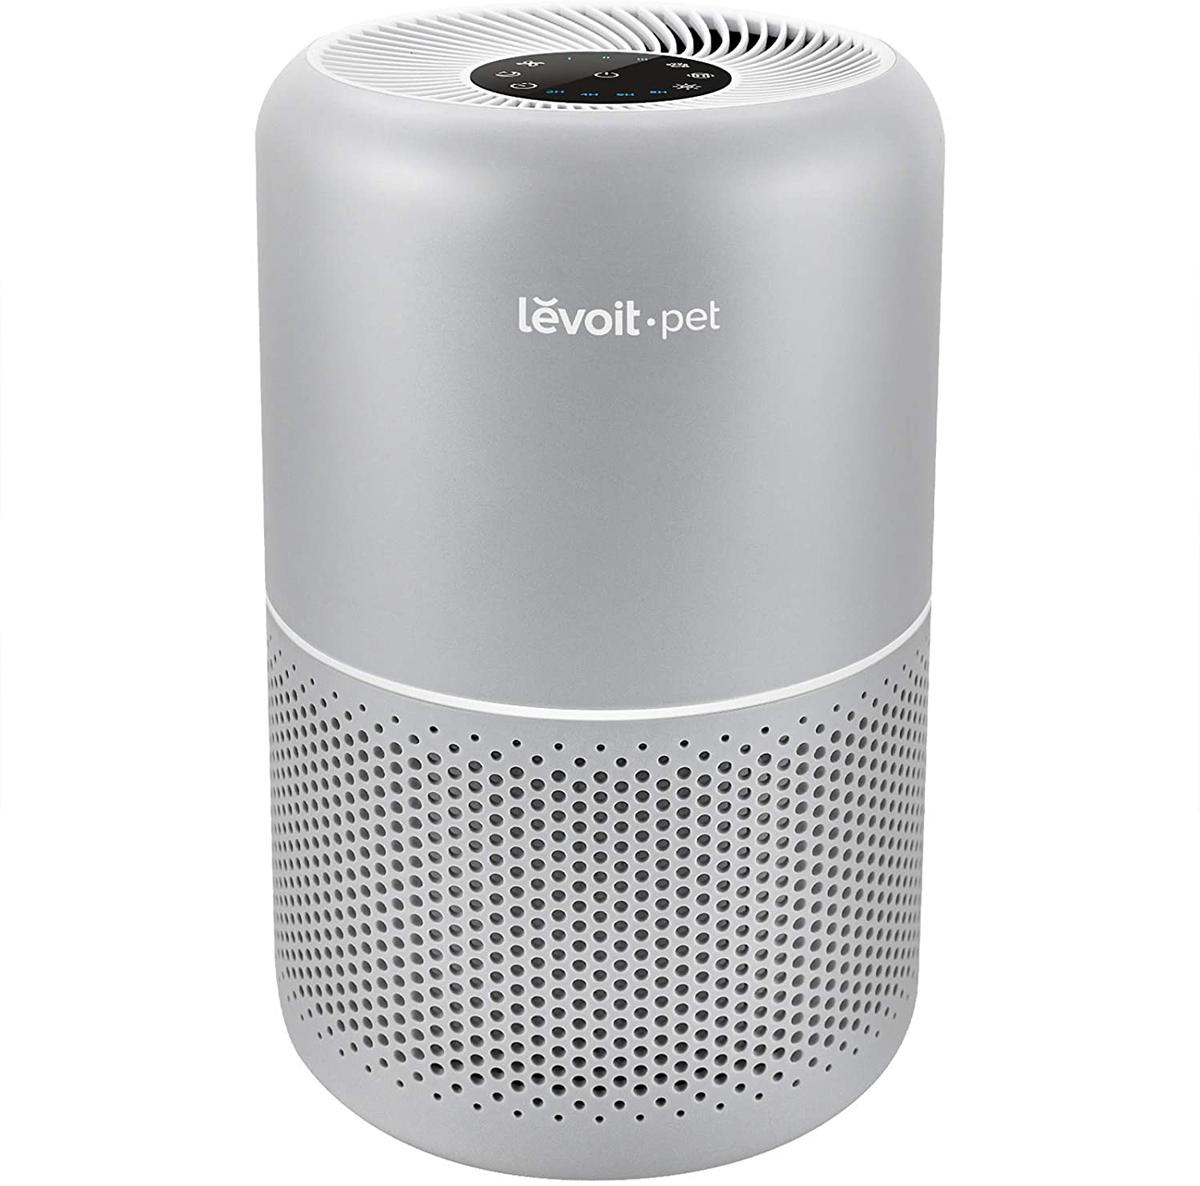 Levoit Air Purifier for Home Allergies and Pets Hair Smokers for $83.99 Shipped